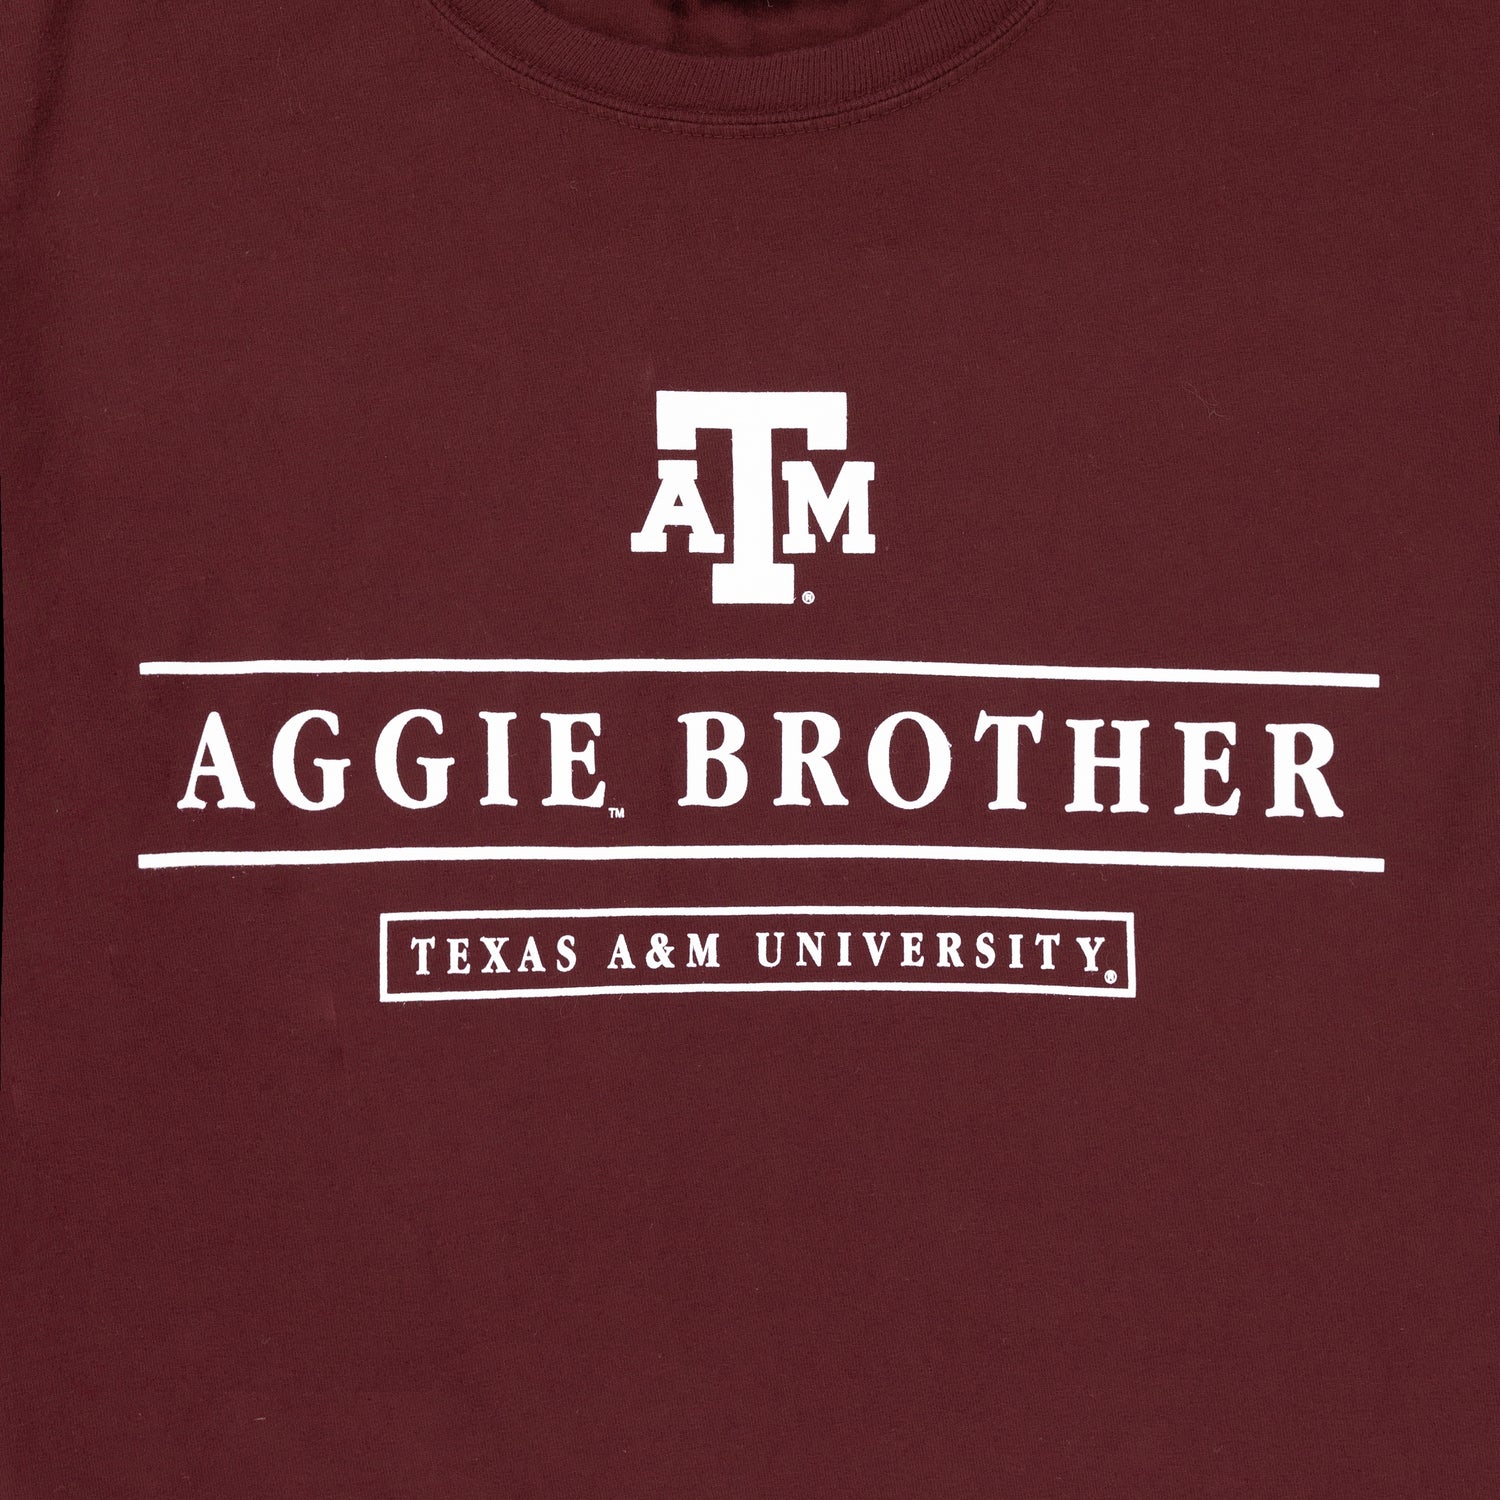 Aggie Brother